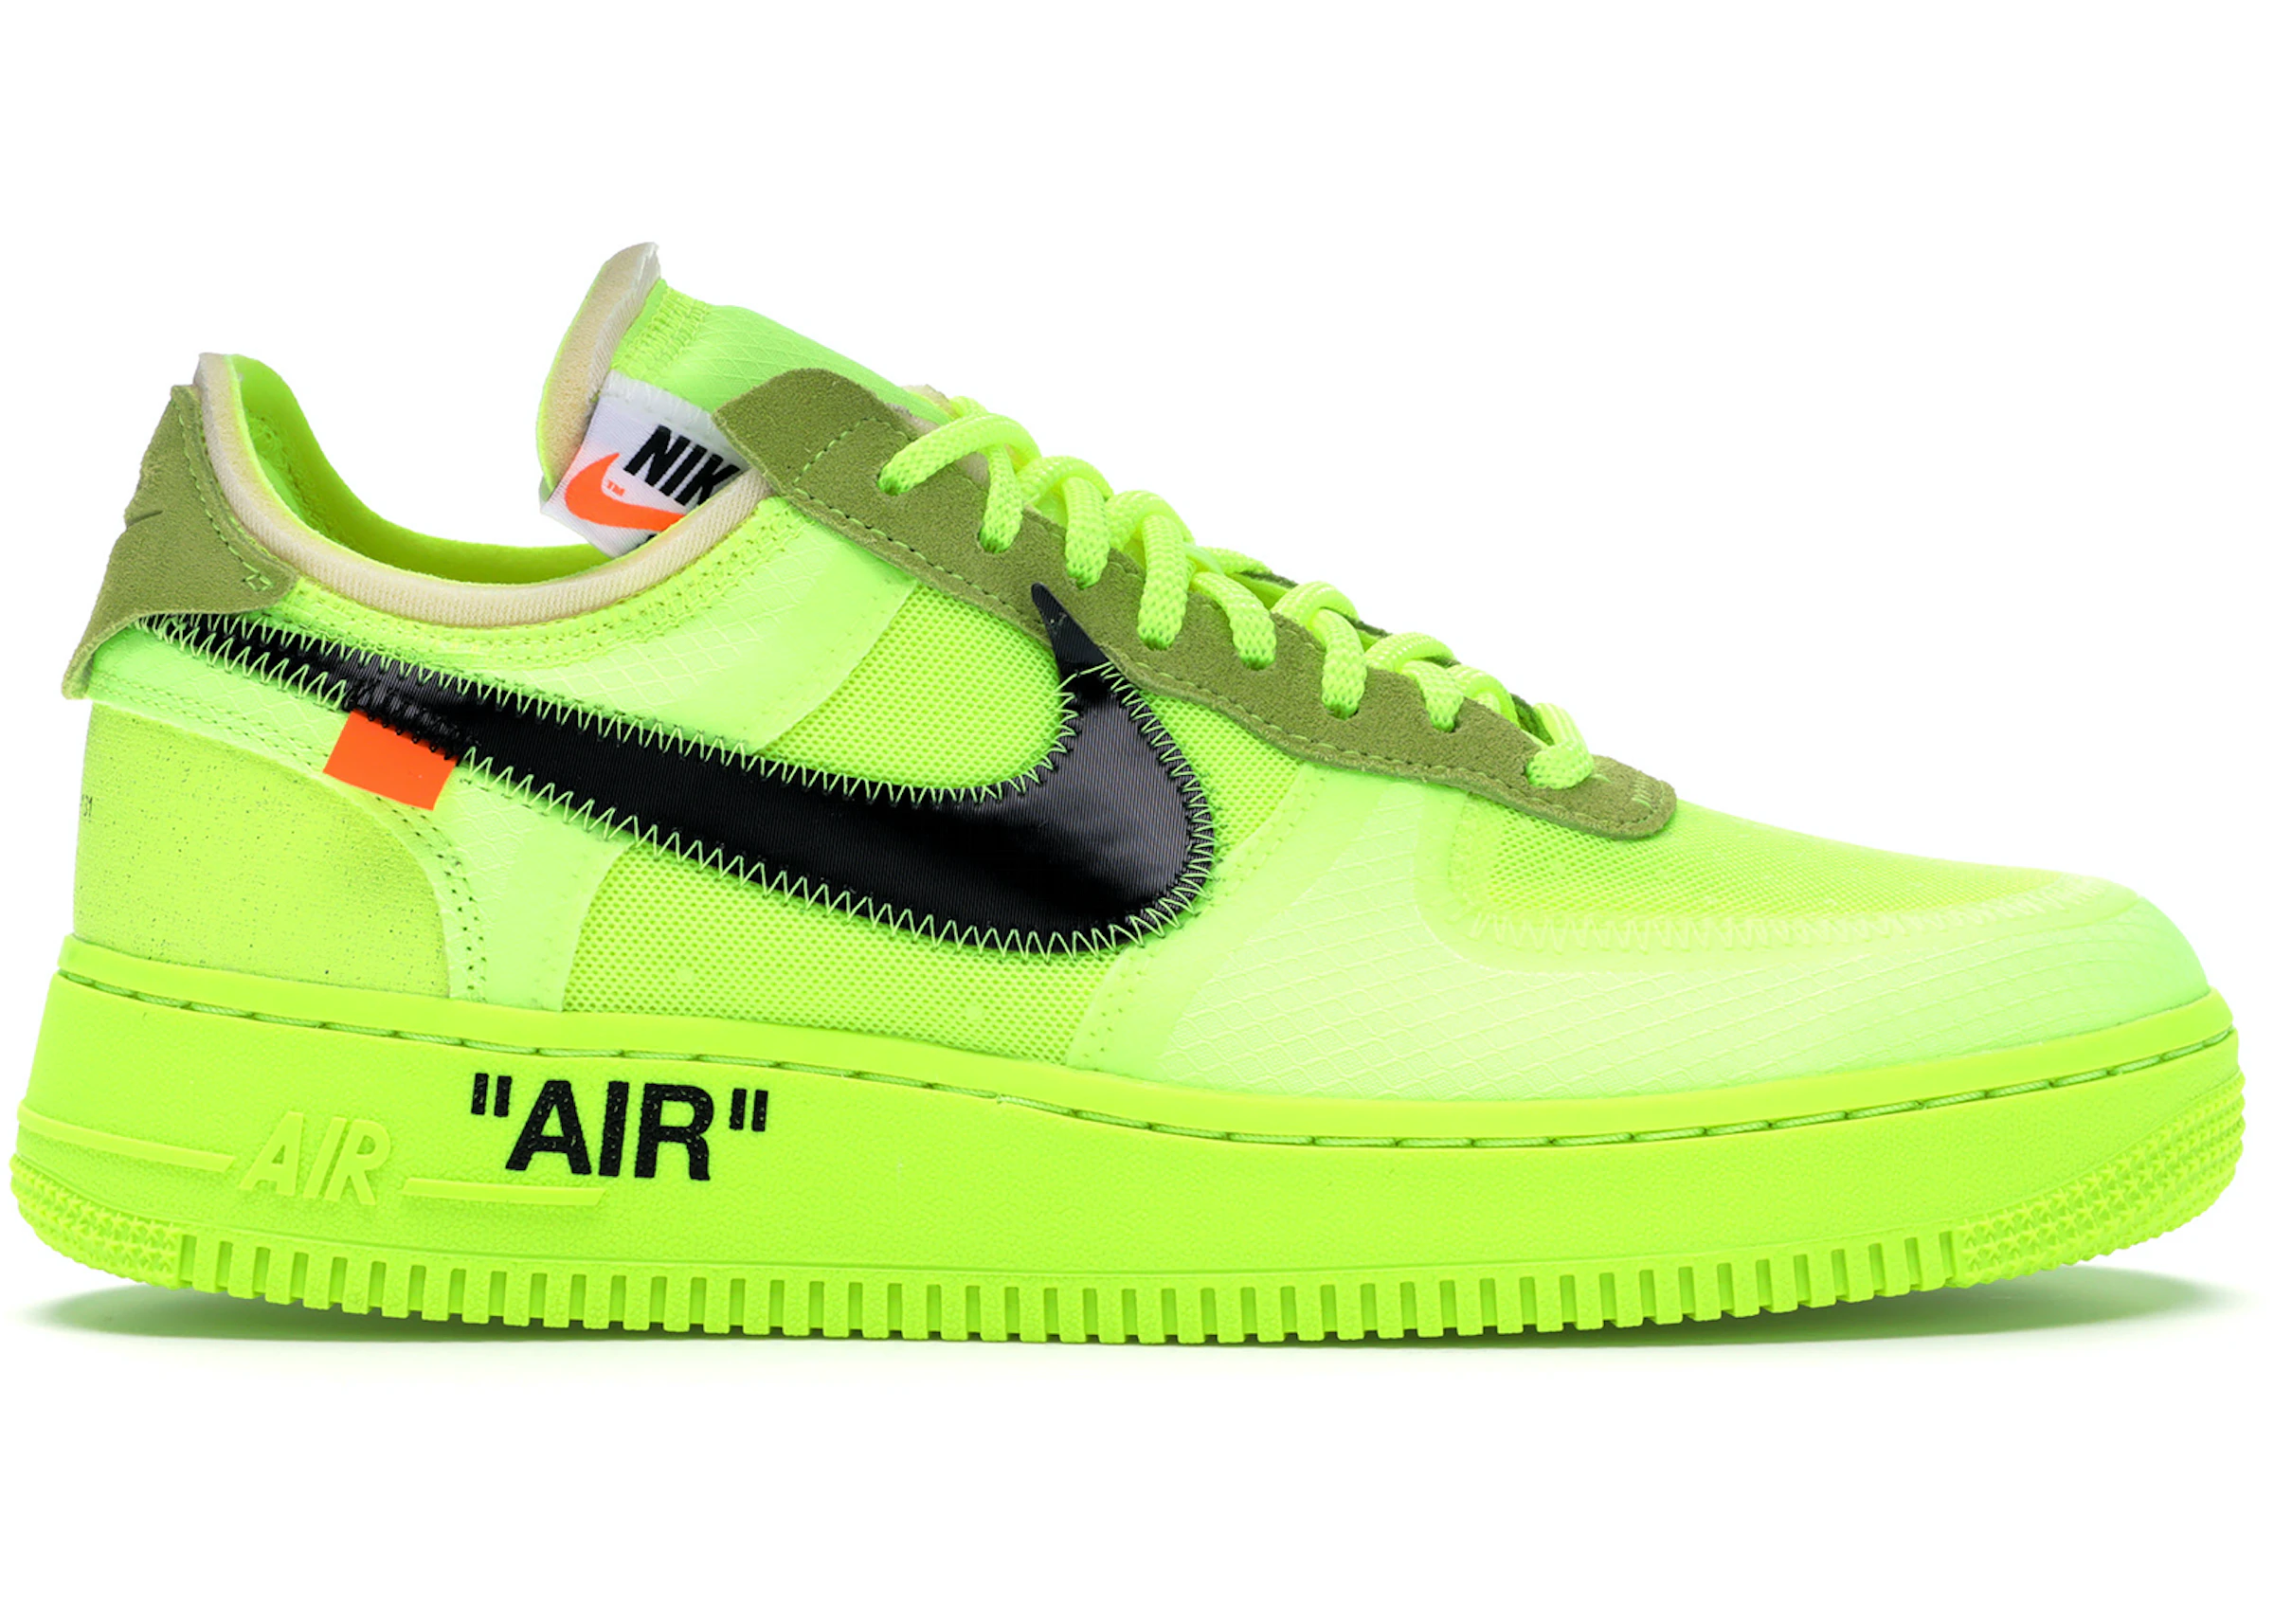 Air Force 1 Low Off-White Volt AO4606-700 - US